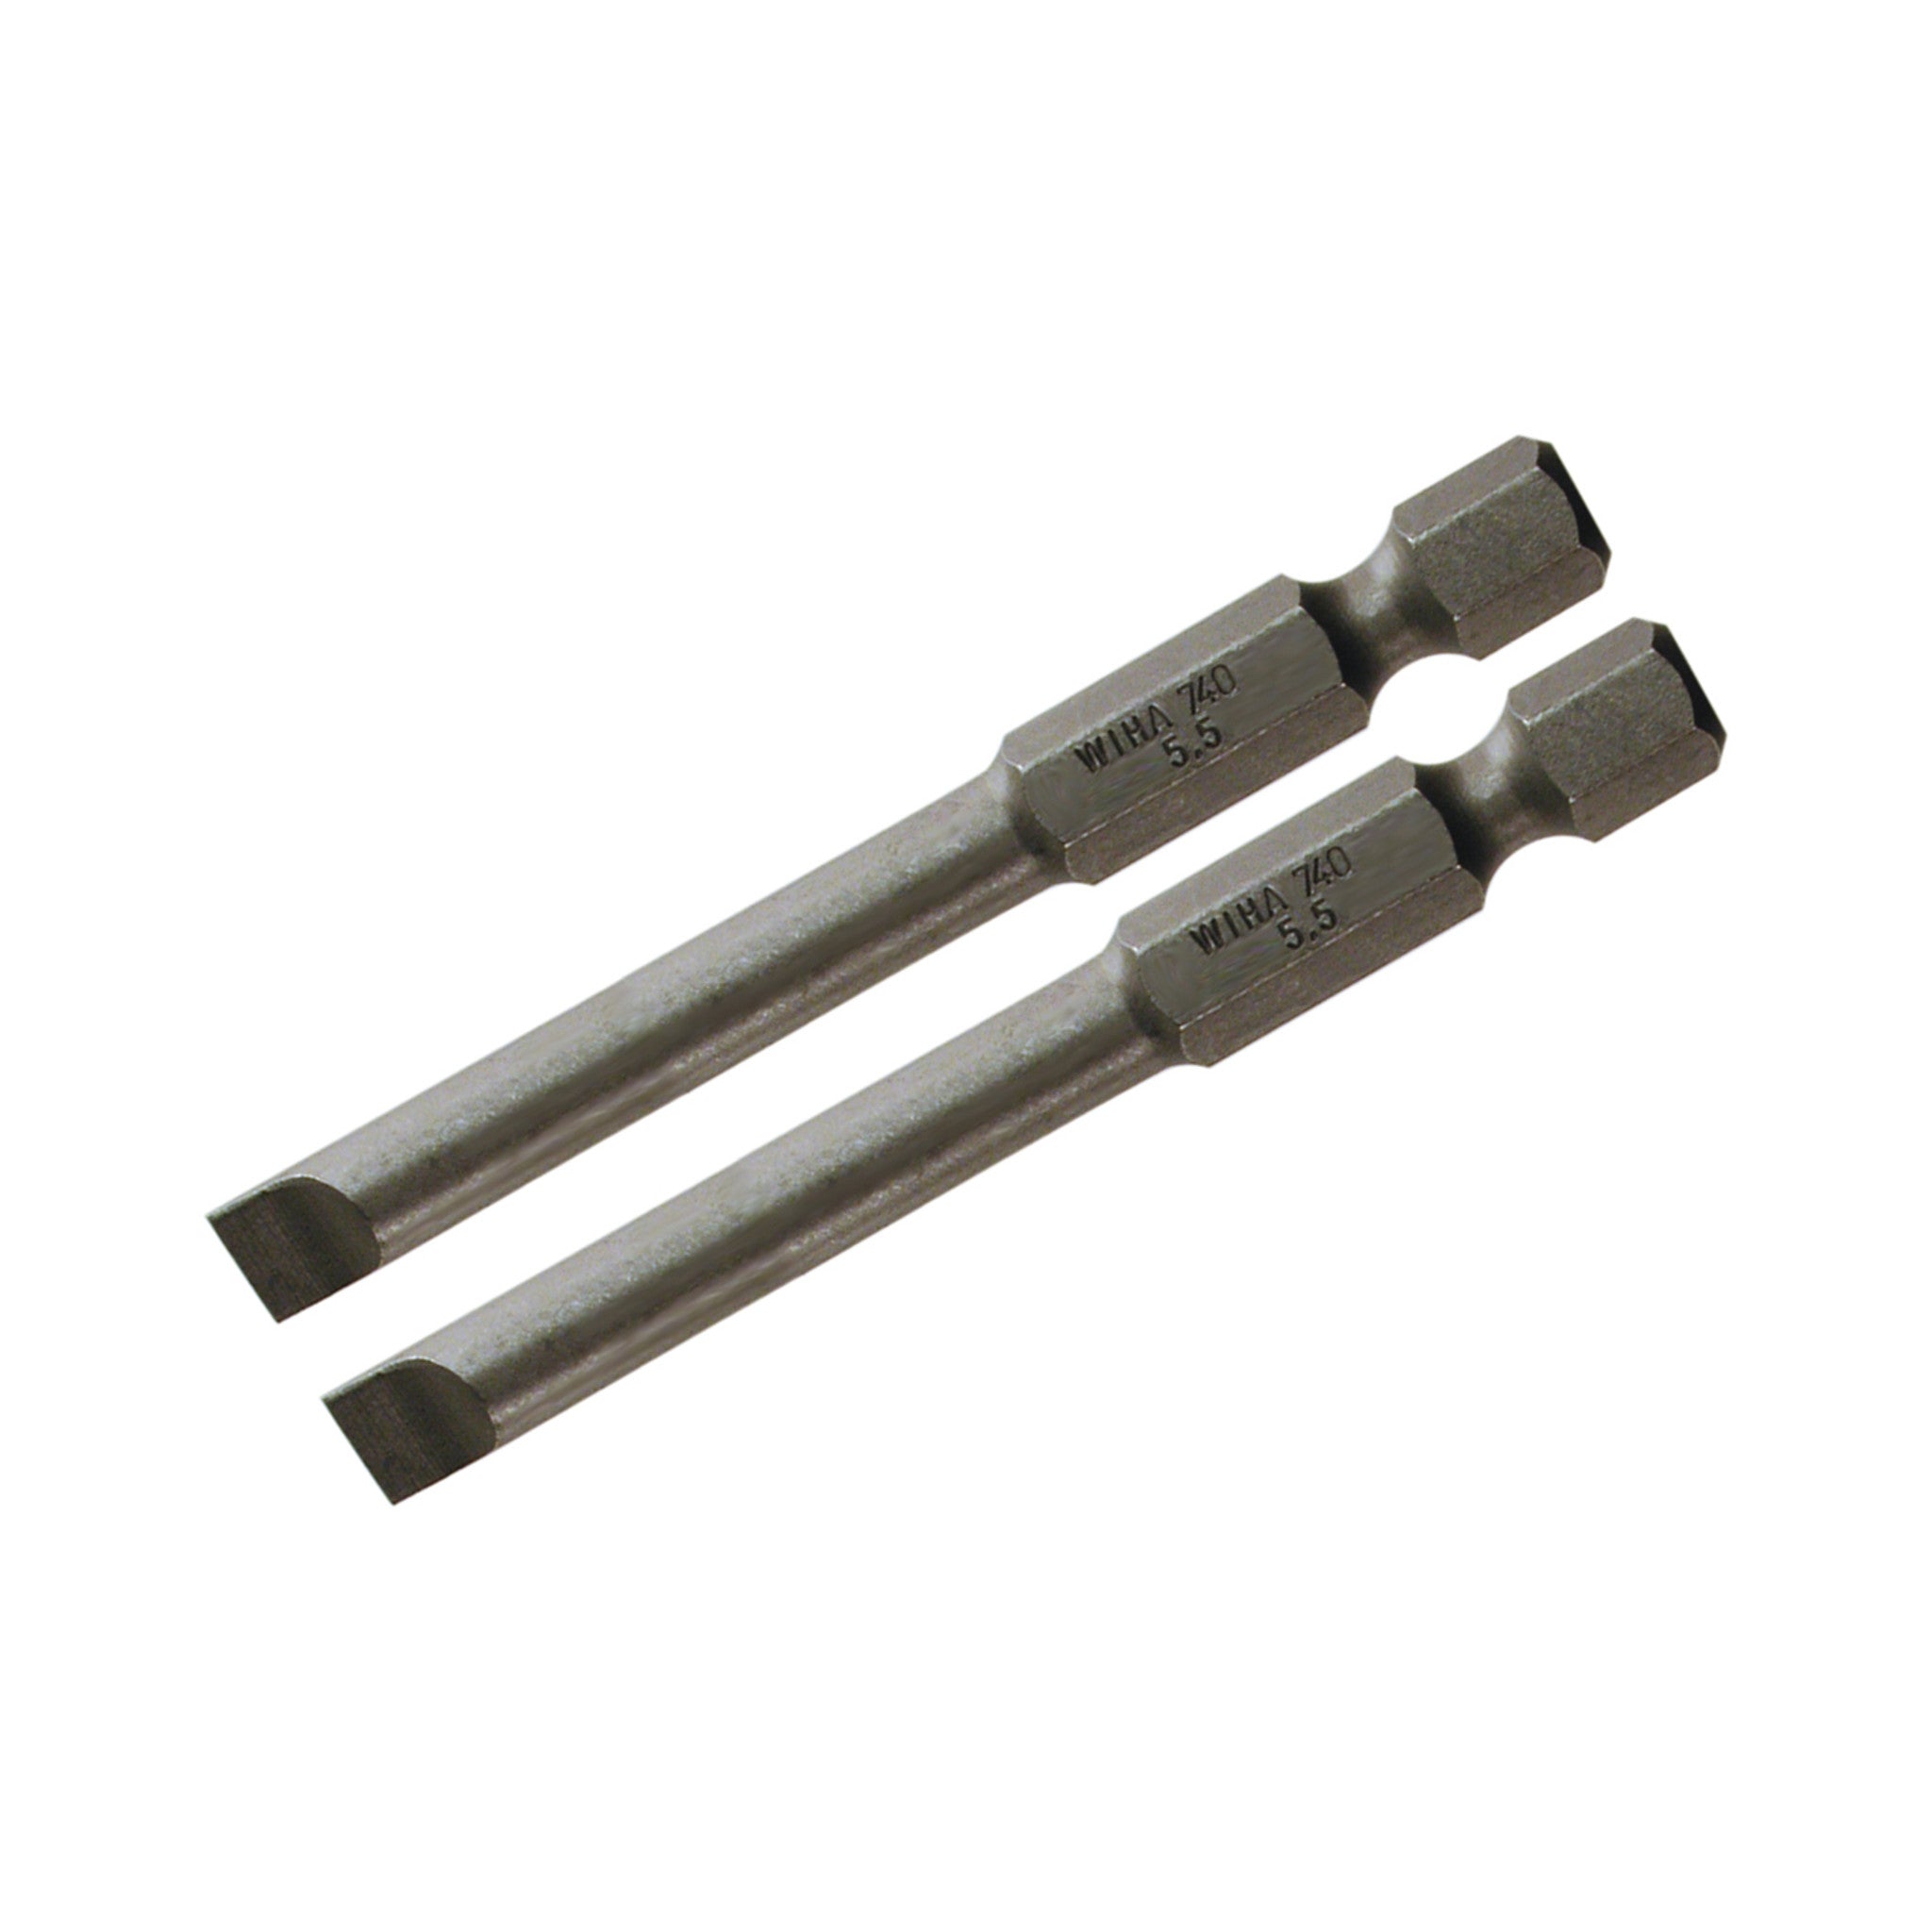 Wiha 73905 Slotted Power Bit 2.5x70mm Pack of 2 Bits Made in Germany